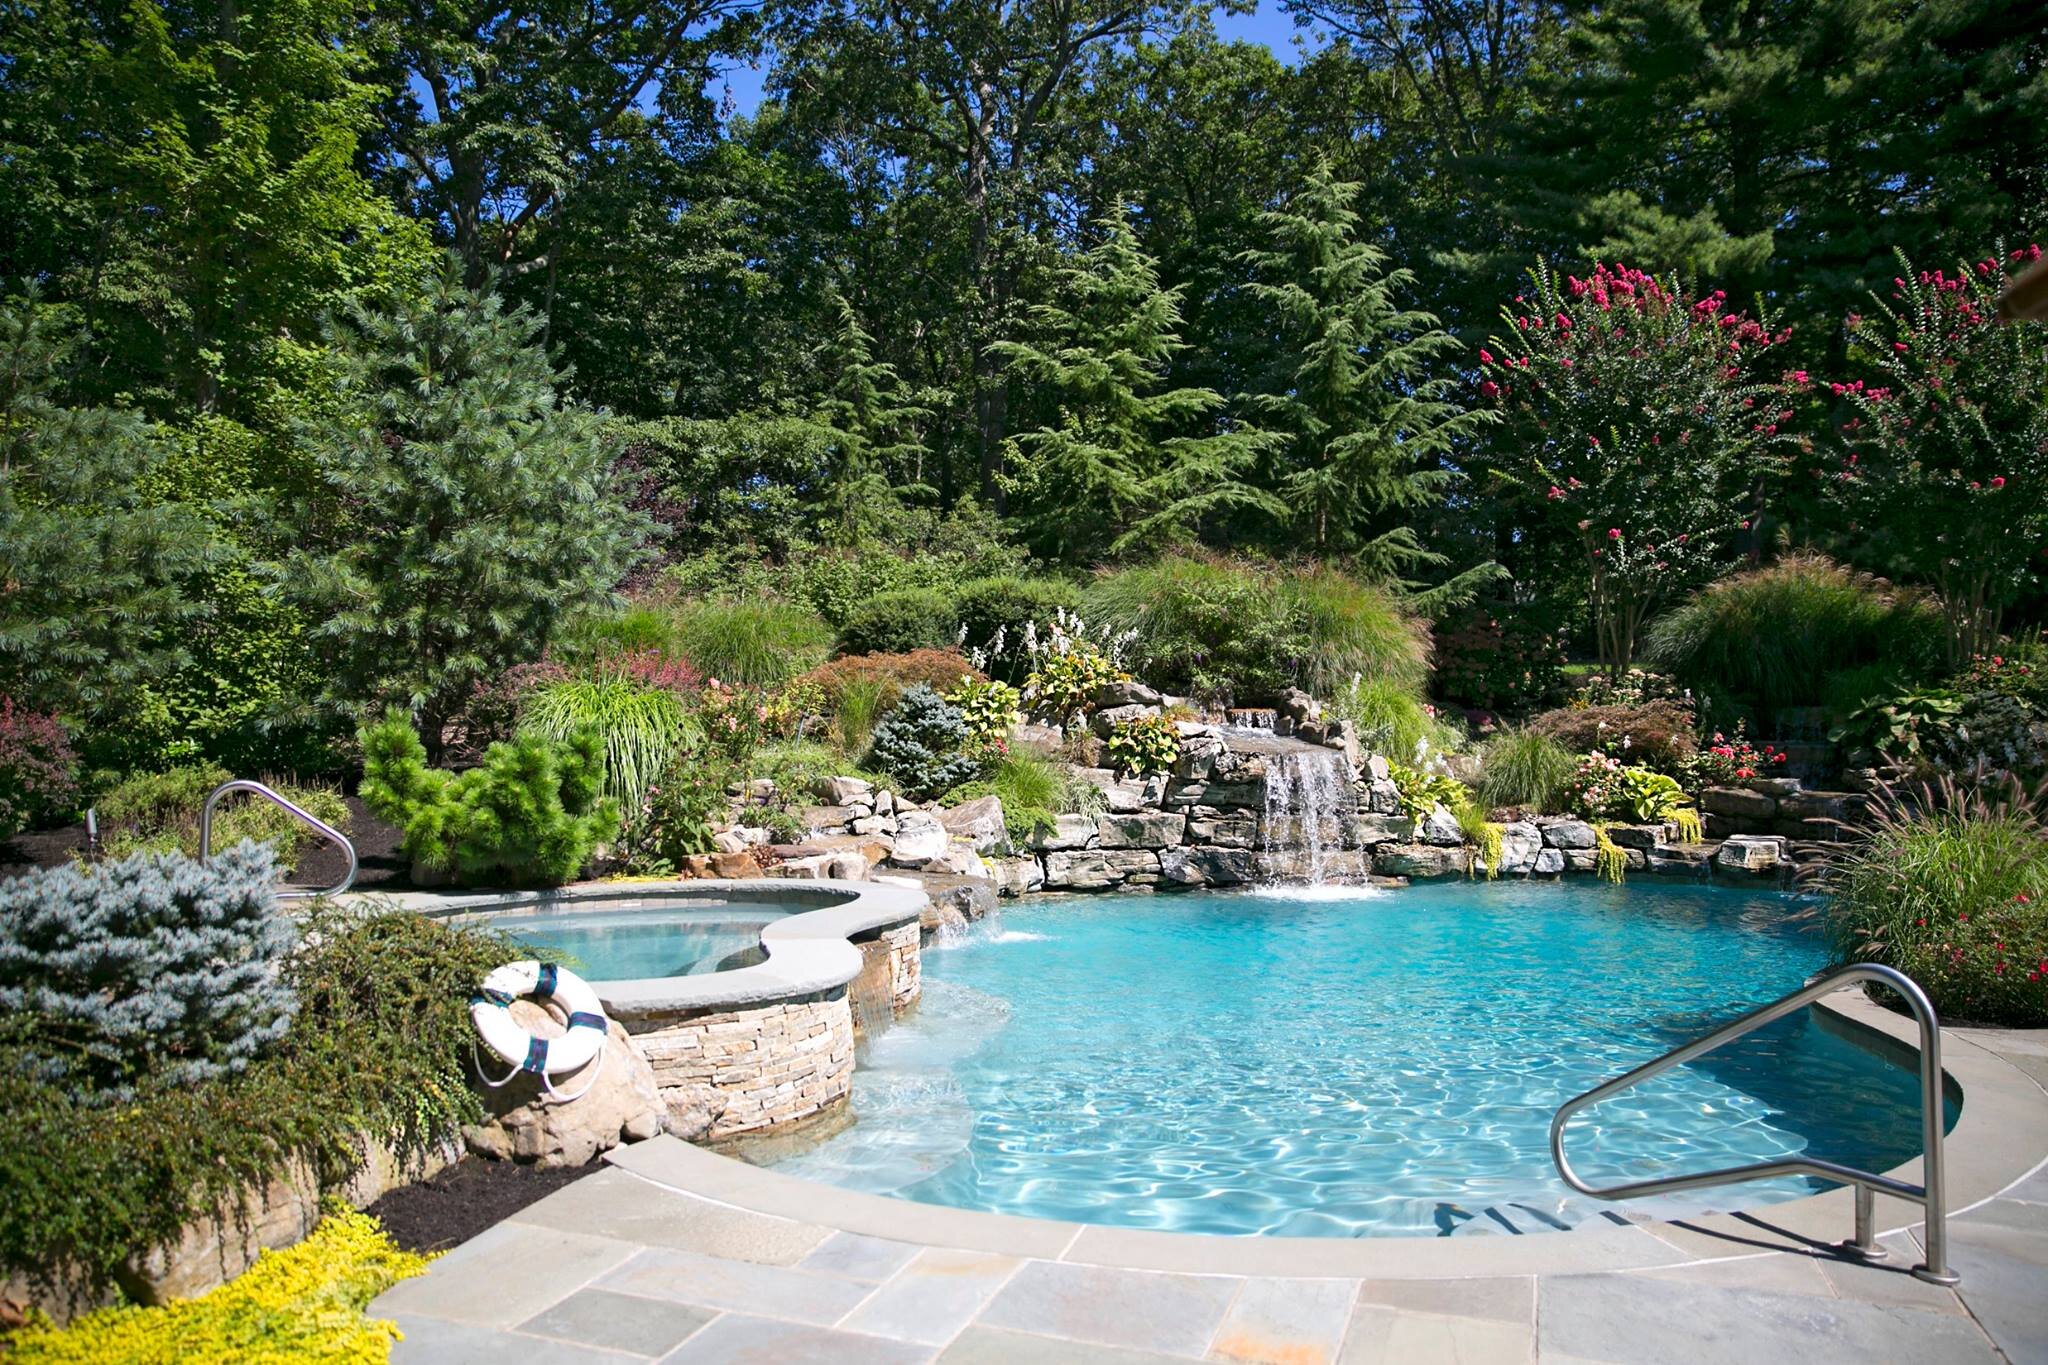 A Gunite Pool Builder'S Tips For A Tropical Backyard On Long Island Ny |  Landscaping, Salt Water Pool Islip Ny, Outdoor Fireplace Glen Cove Ny | The  Platinum Group